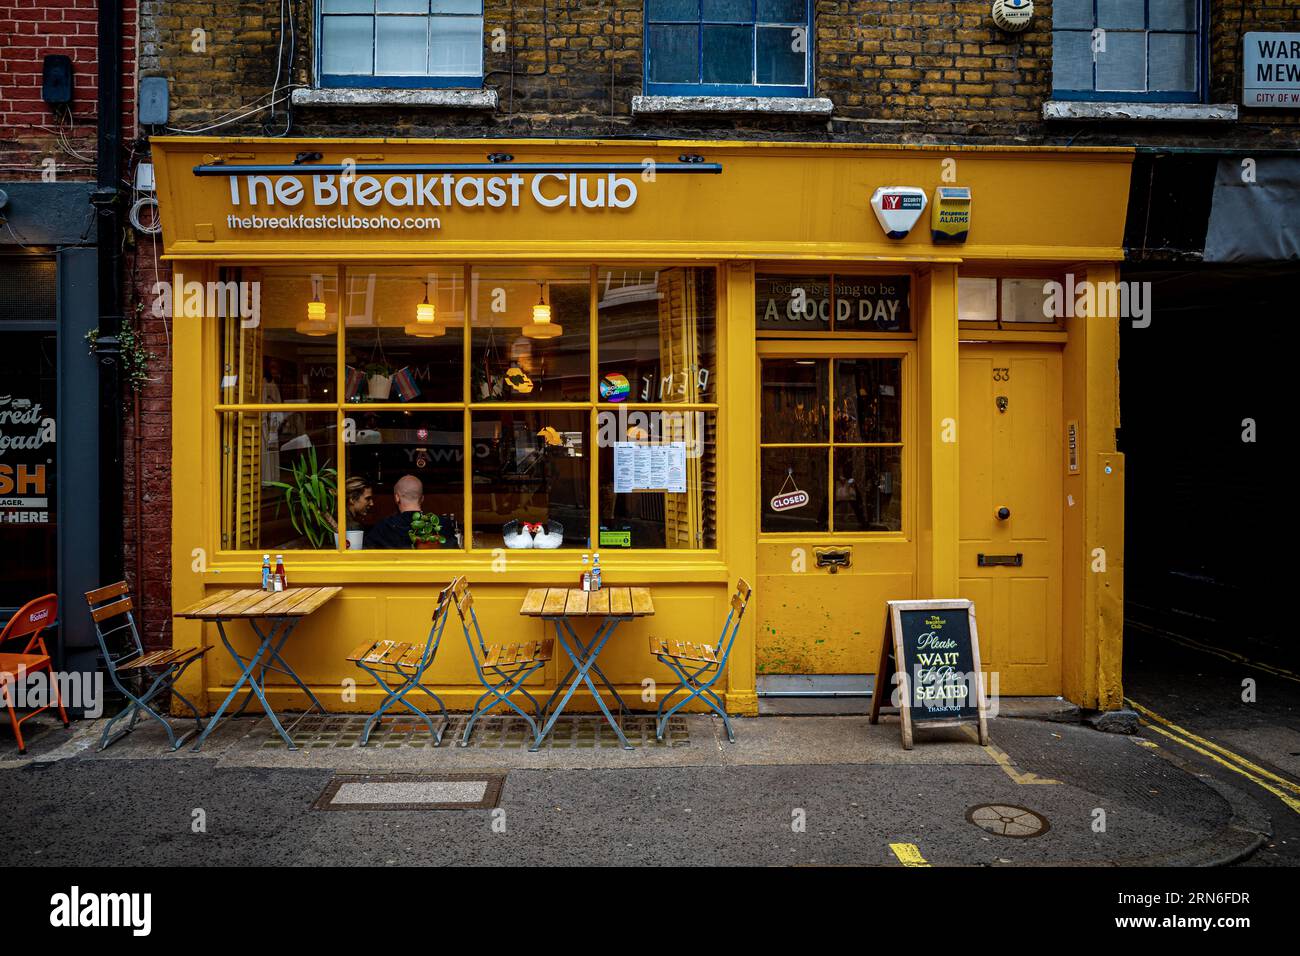 The Breakfast Club Soho London - the Breakfast Club restaurant 33 D'Arblay St, Soho, London. The Breakfast Club was founded in 2005 at this location. Stock Photo